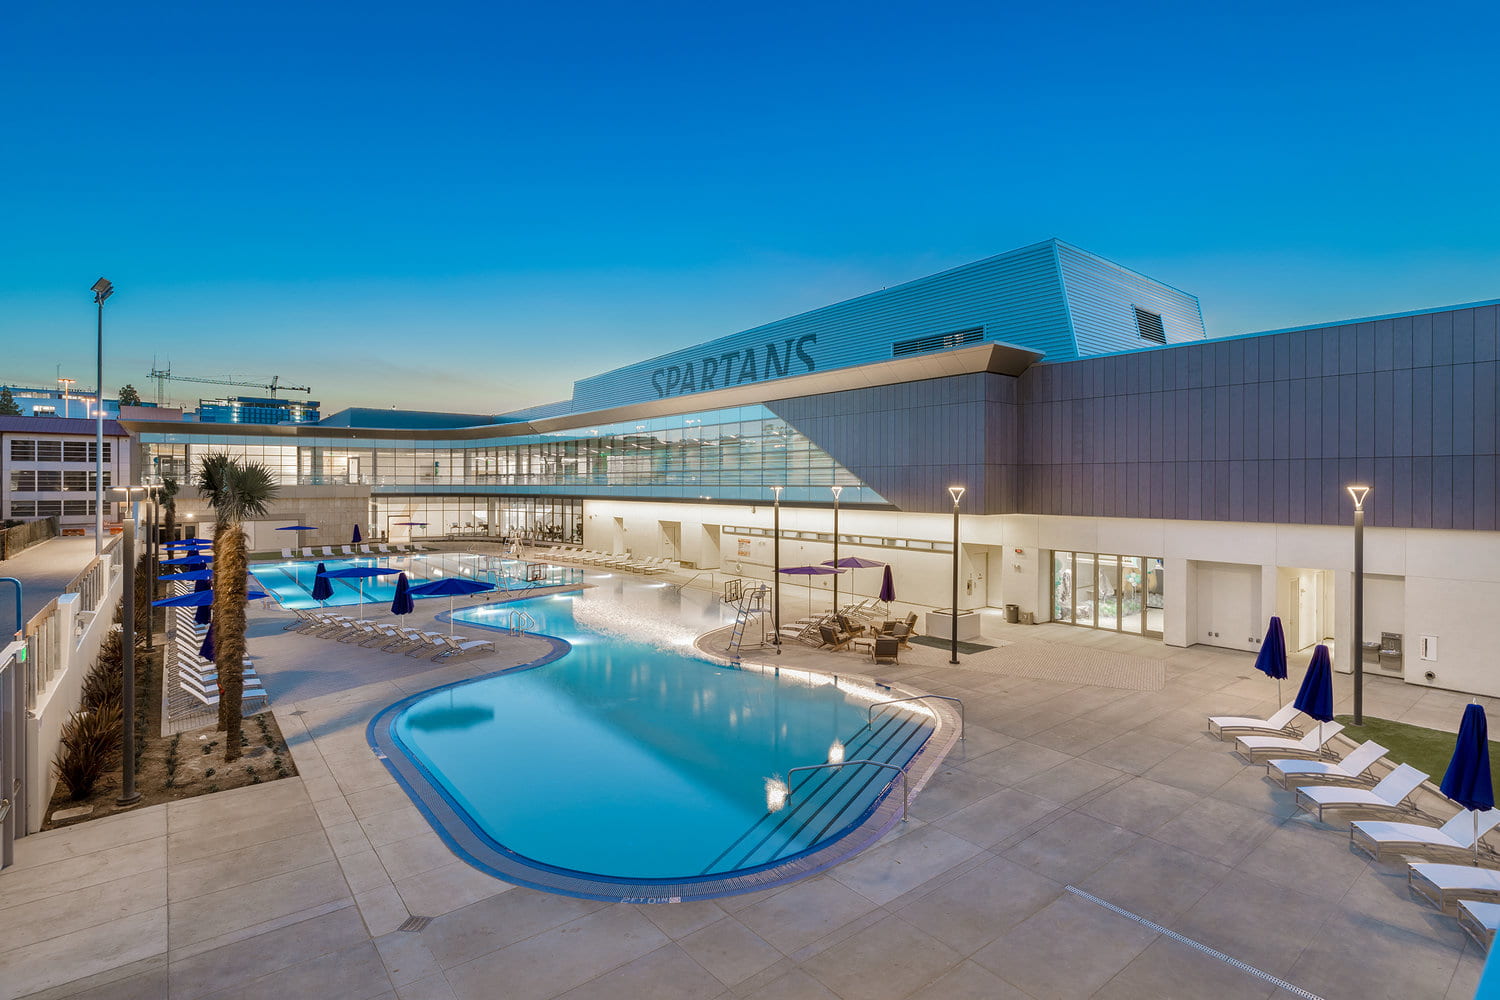 Night shot of the SRAC pool and exterior building.